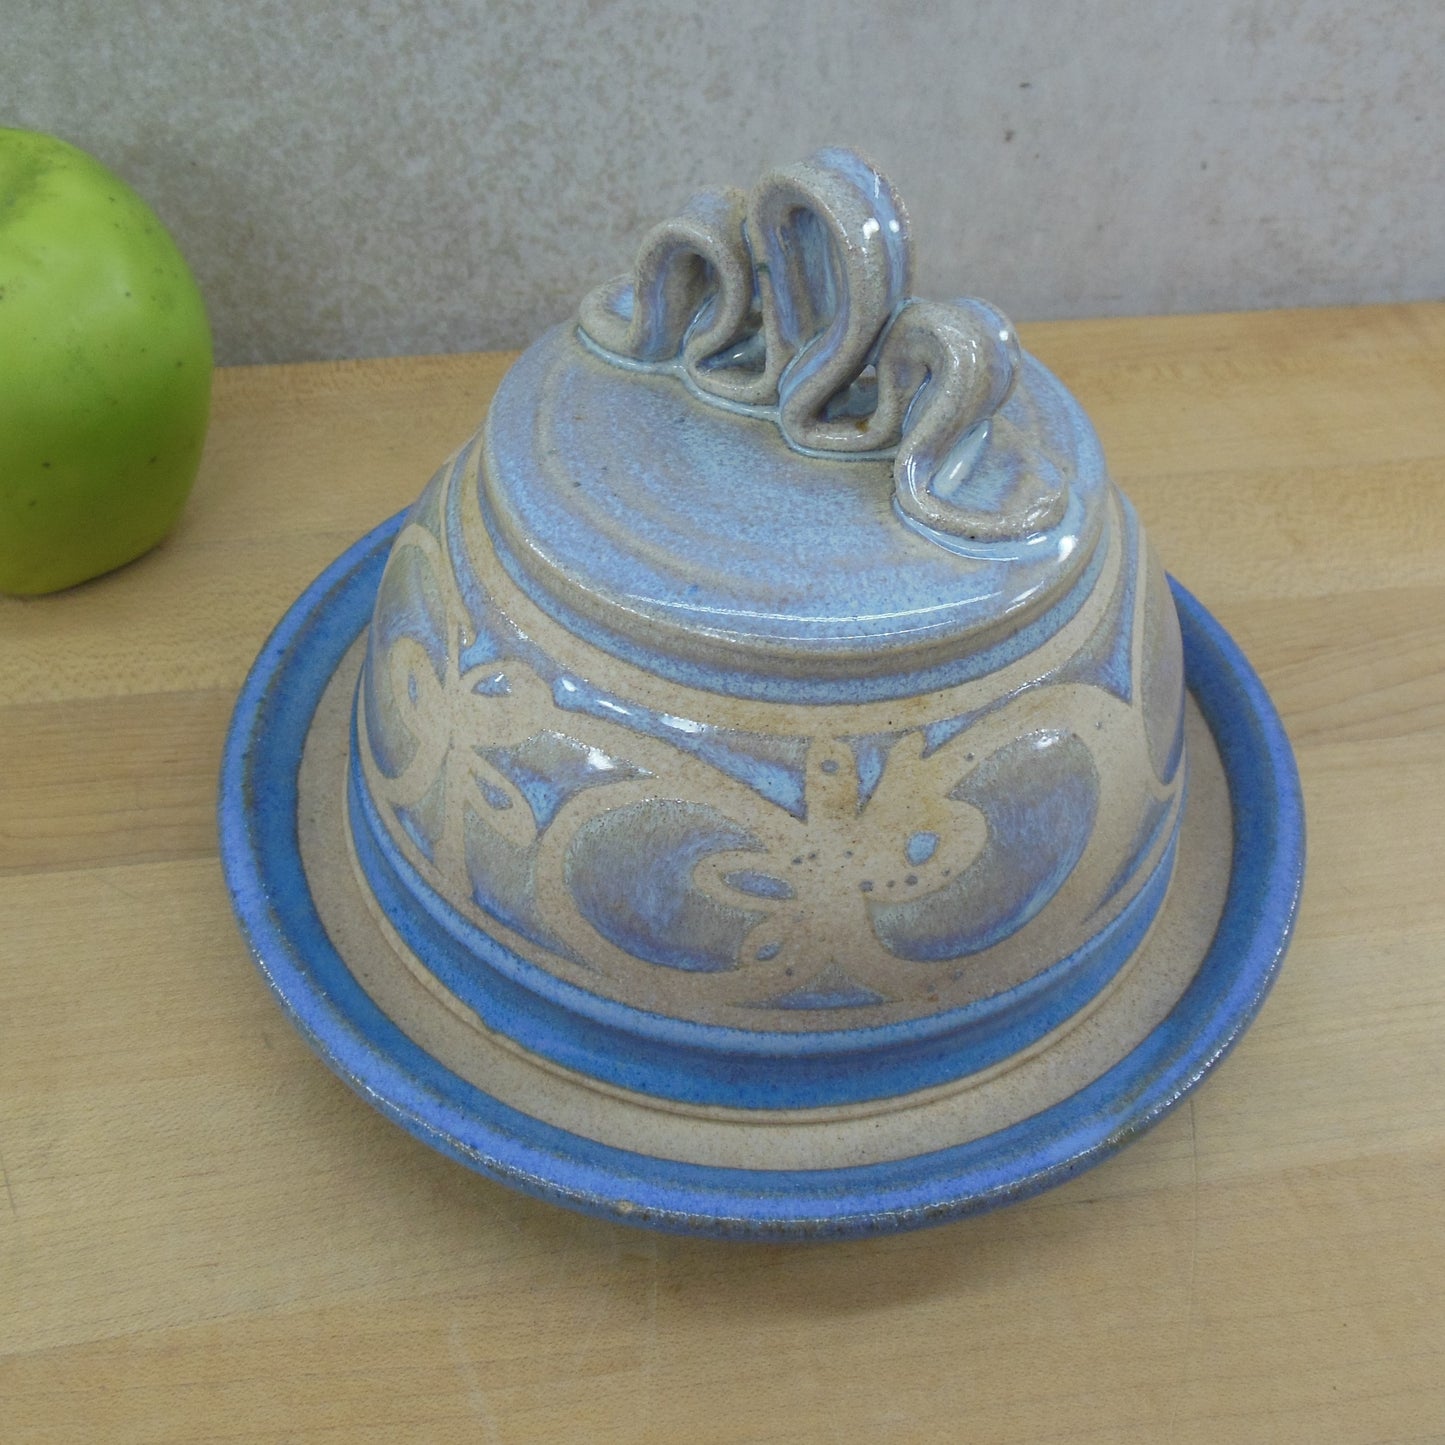 Frank Massarella Ojai Ca Covered Pottery Butter Cheese Dish Domed Lid Ribbon Handle